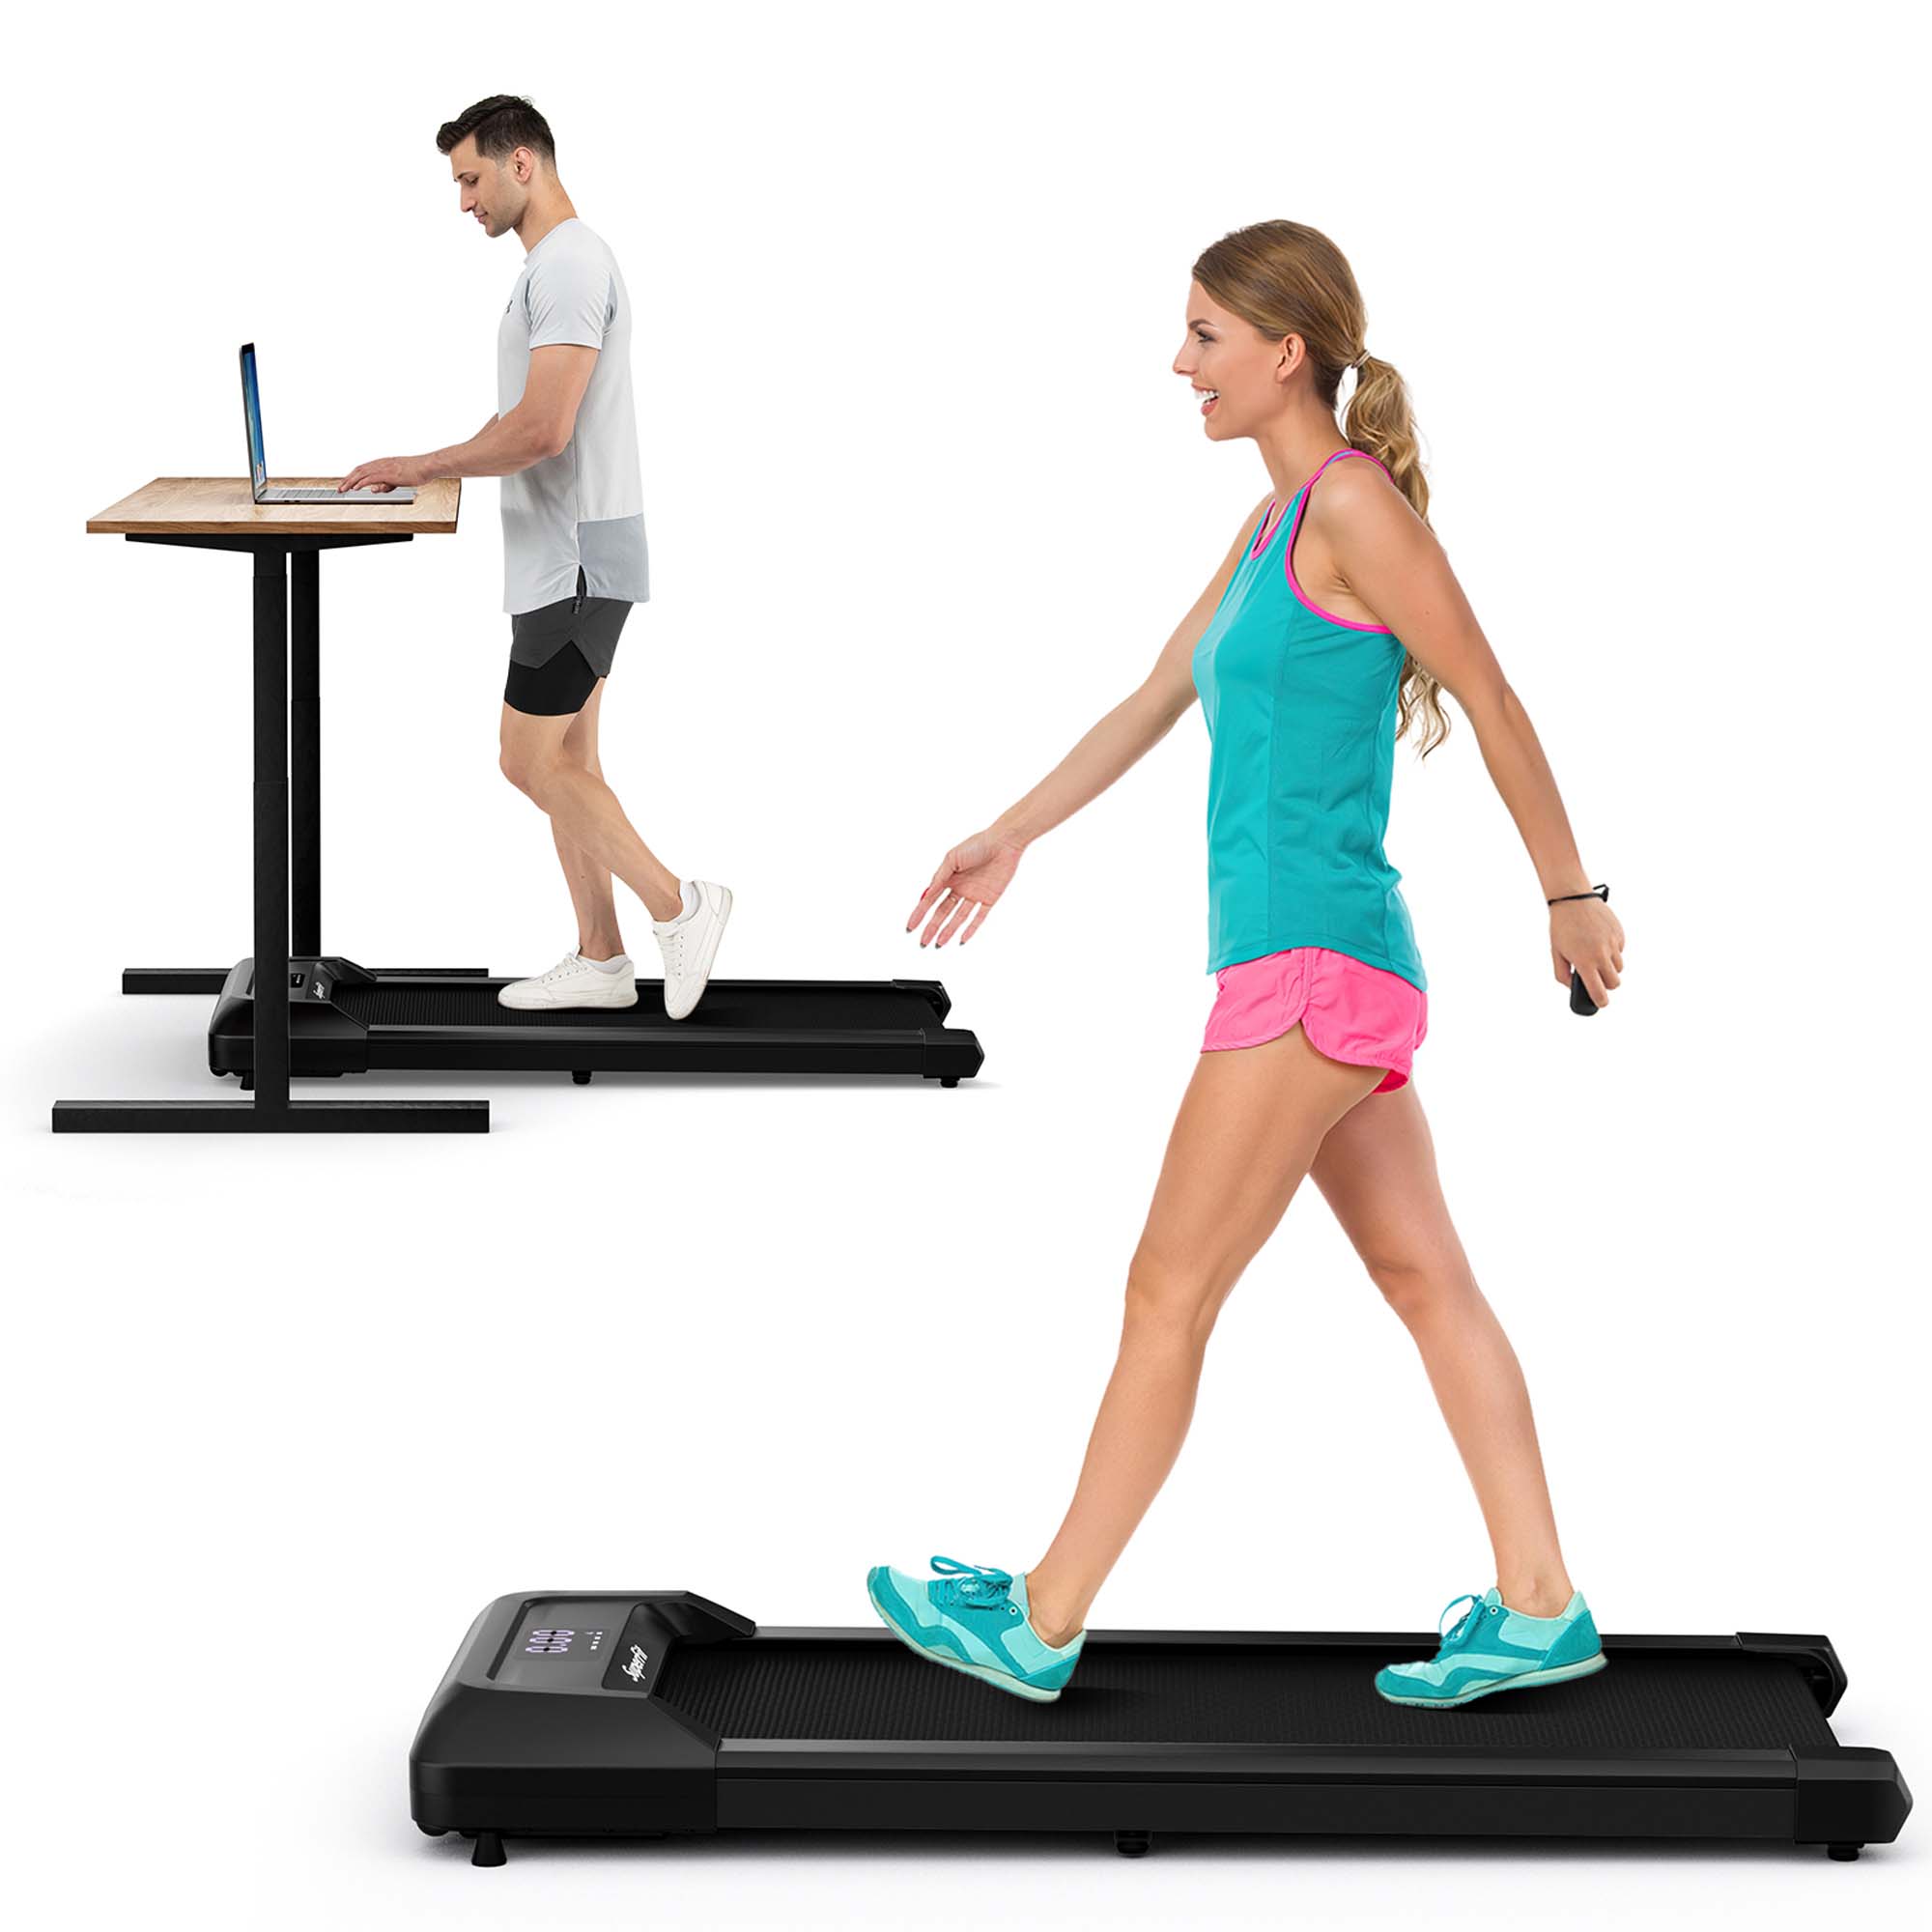 SuperFit 0.6-3.8MPH Walking Pad Under Desk Treadmill with Remote Control and LED Display Black - image 1 of 10